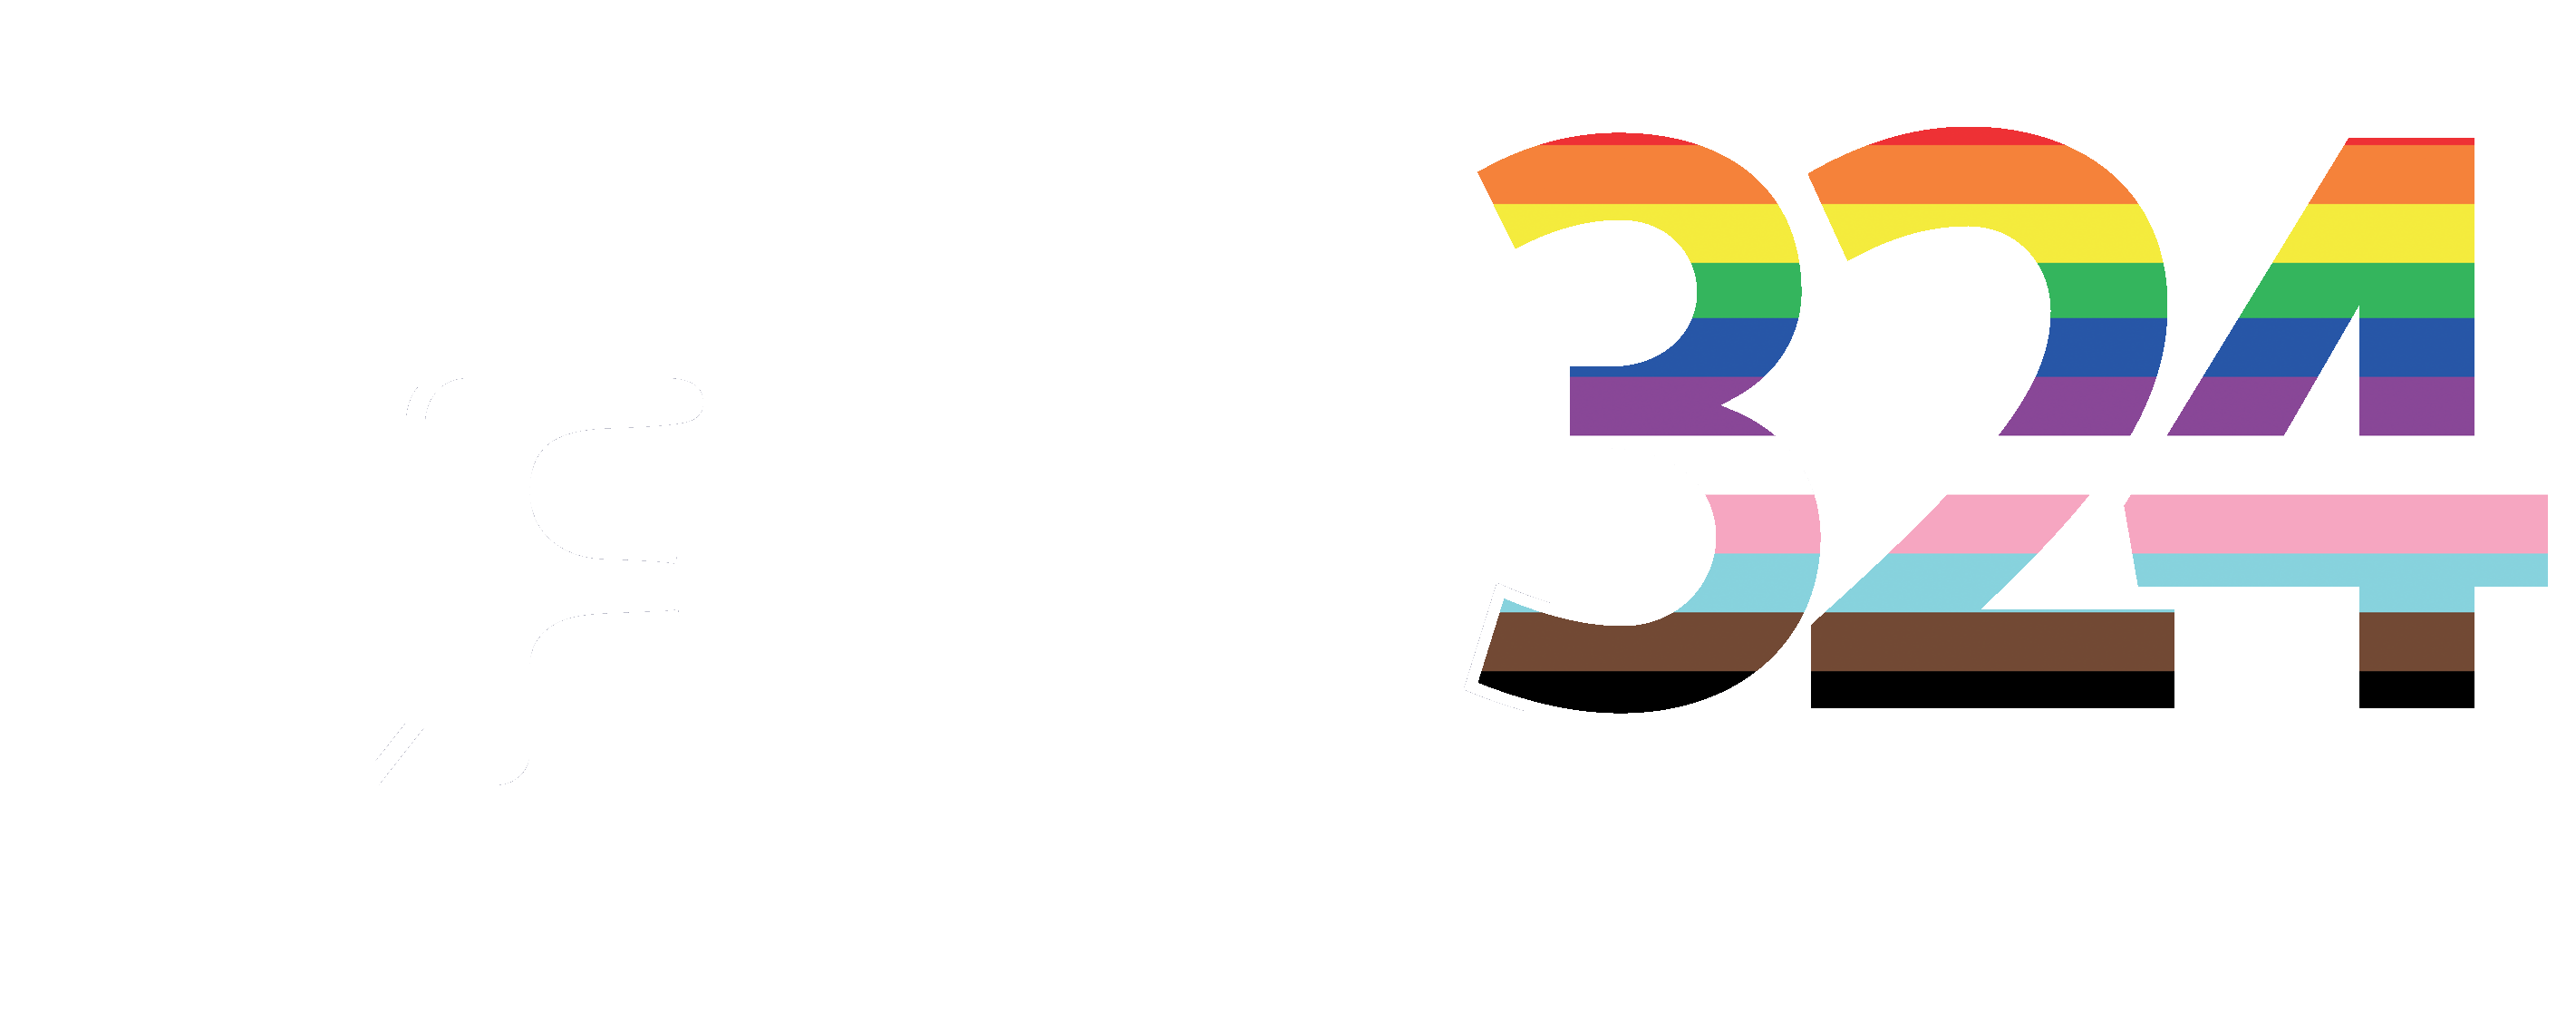 A Voice for Working California